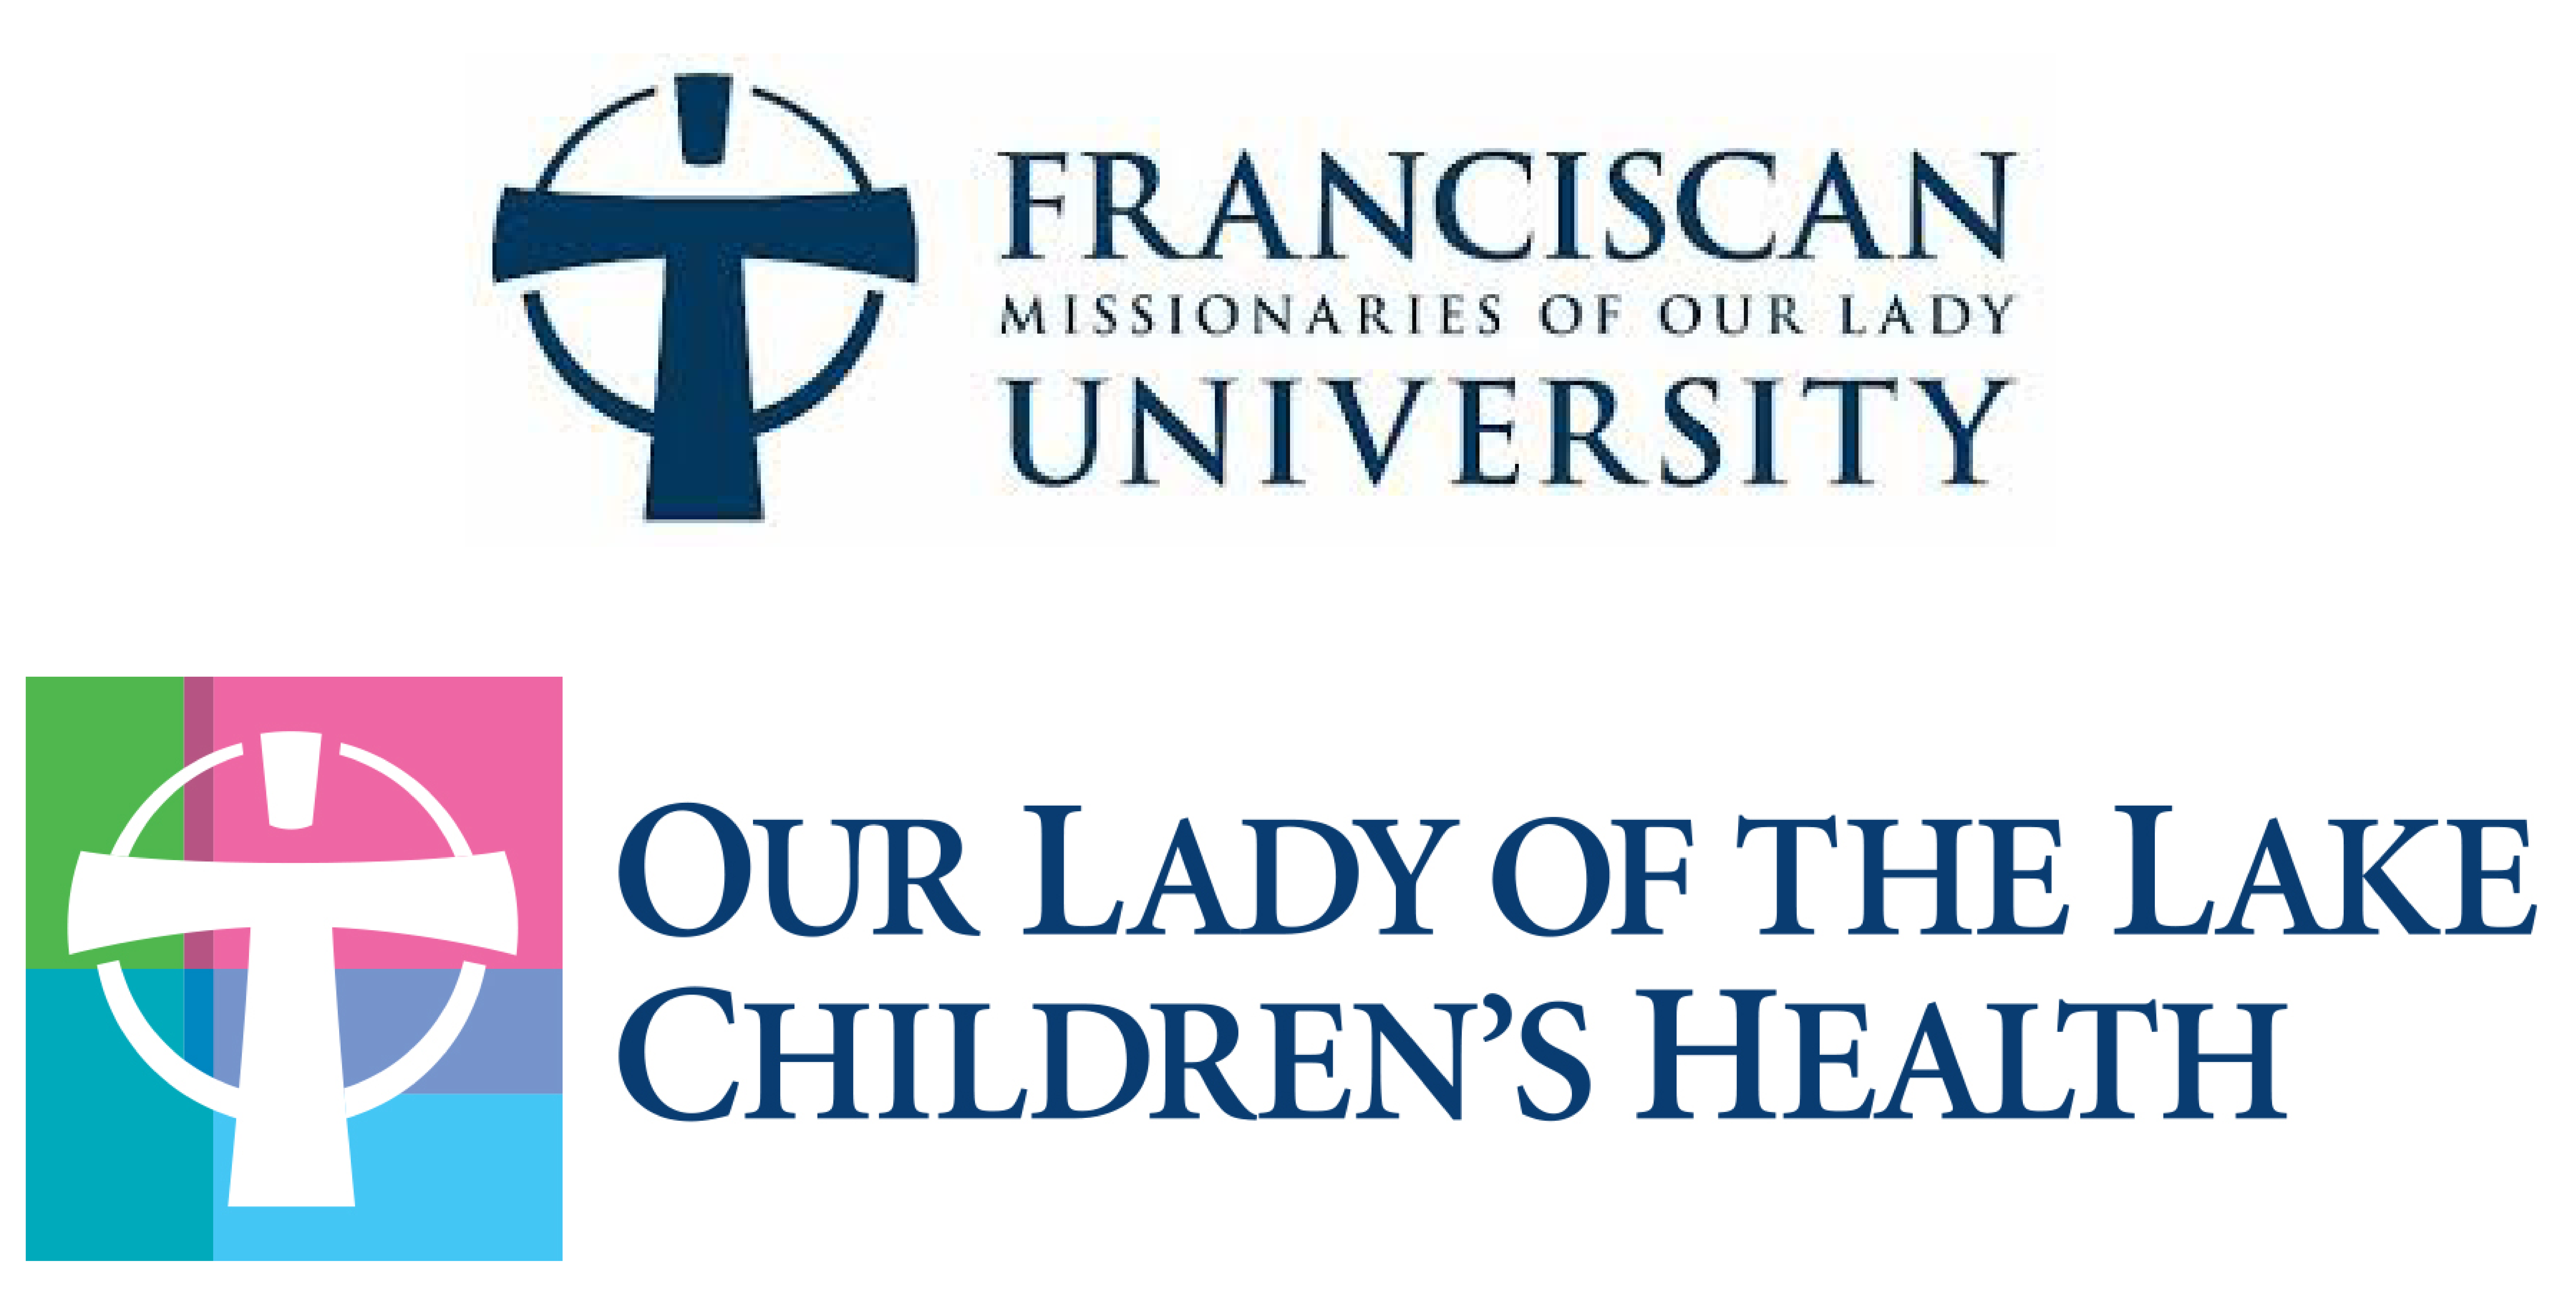 Franciscan Missionaries of Our Lady University + Our Lady of the Lake Children's Health 